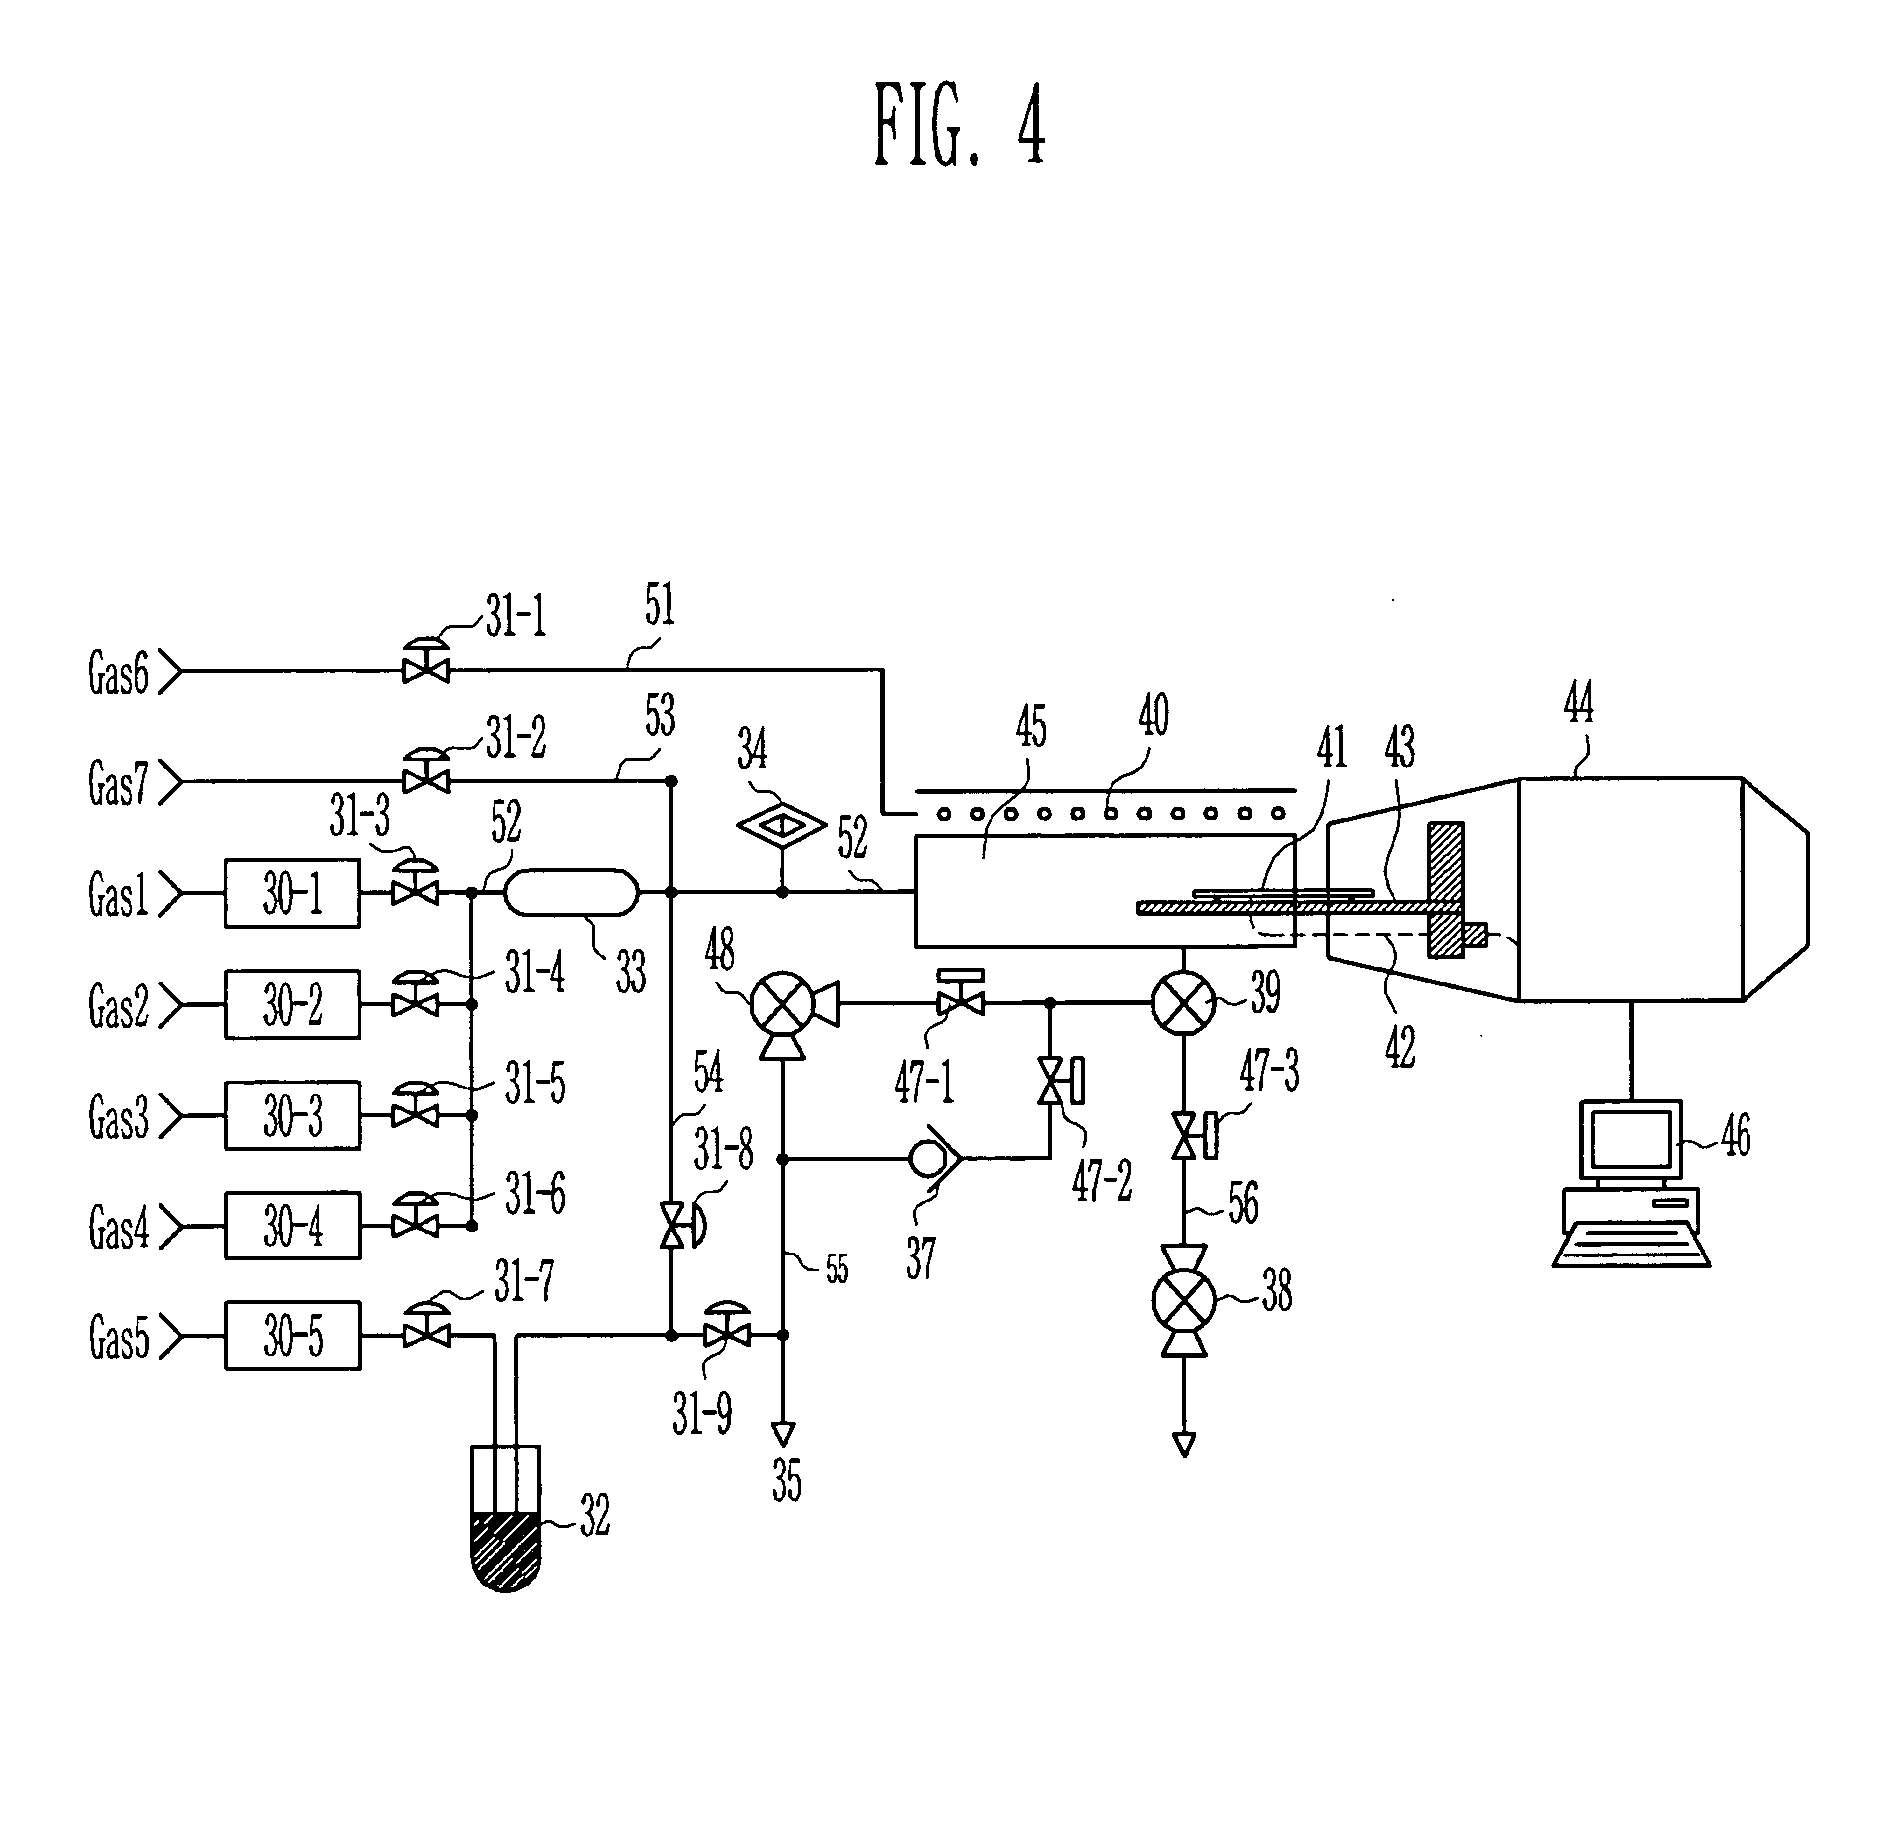 Radical assisted oxidation apparatus